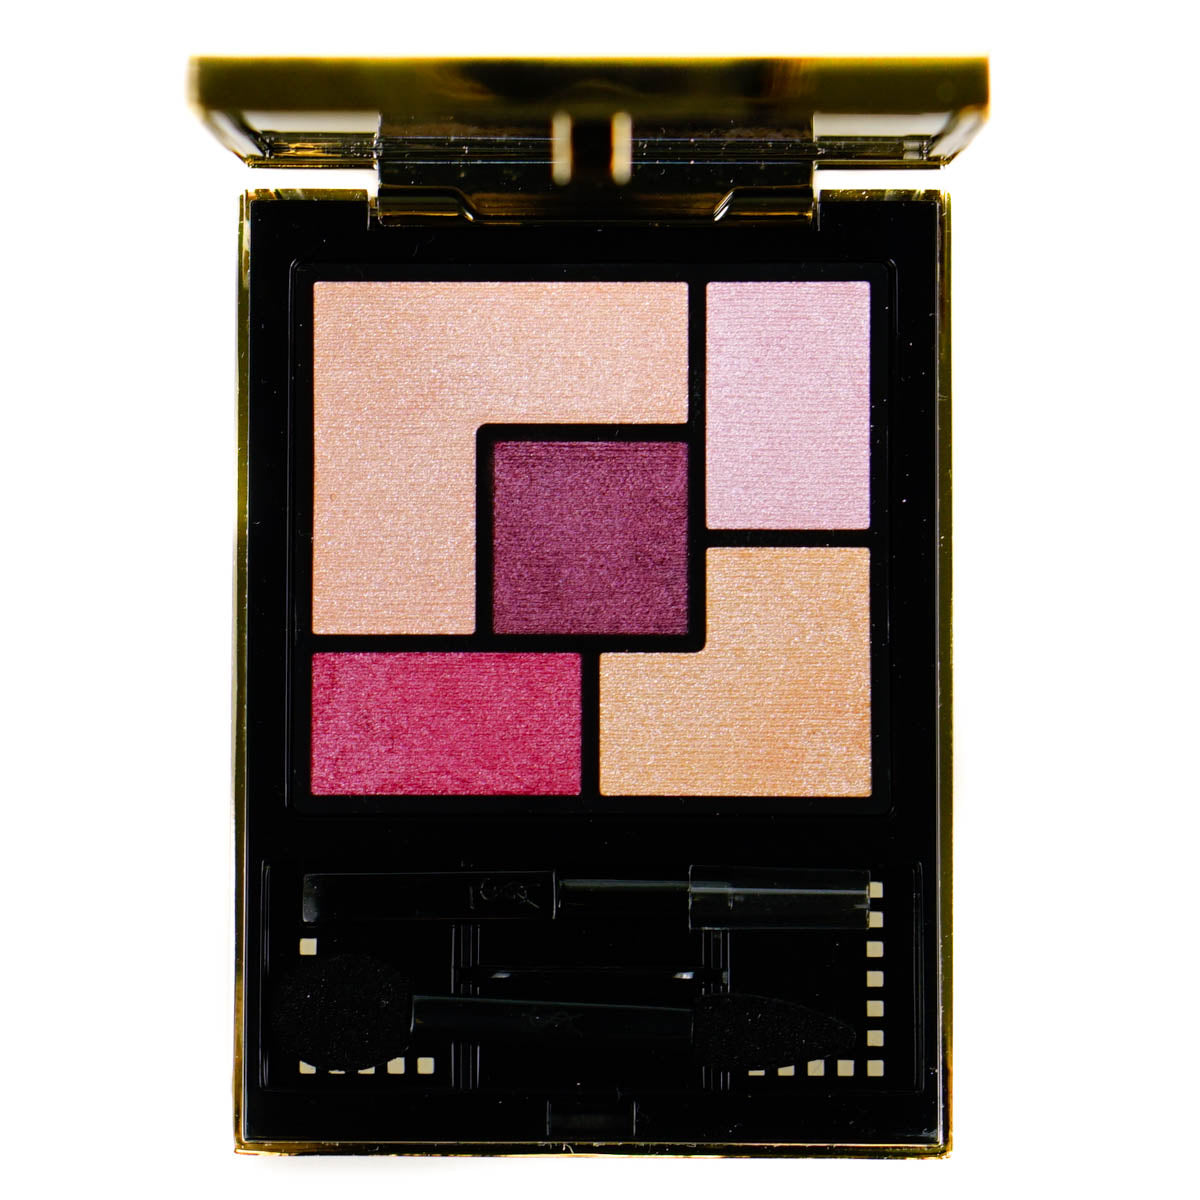 Yves Saint Laurent Couture Palette 5 Color Ready To Wear 9 Love